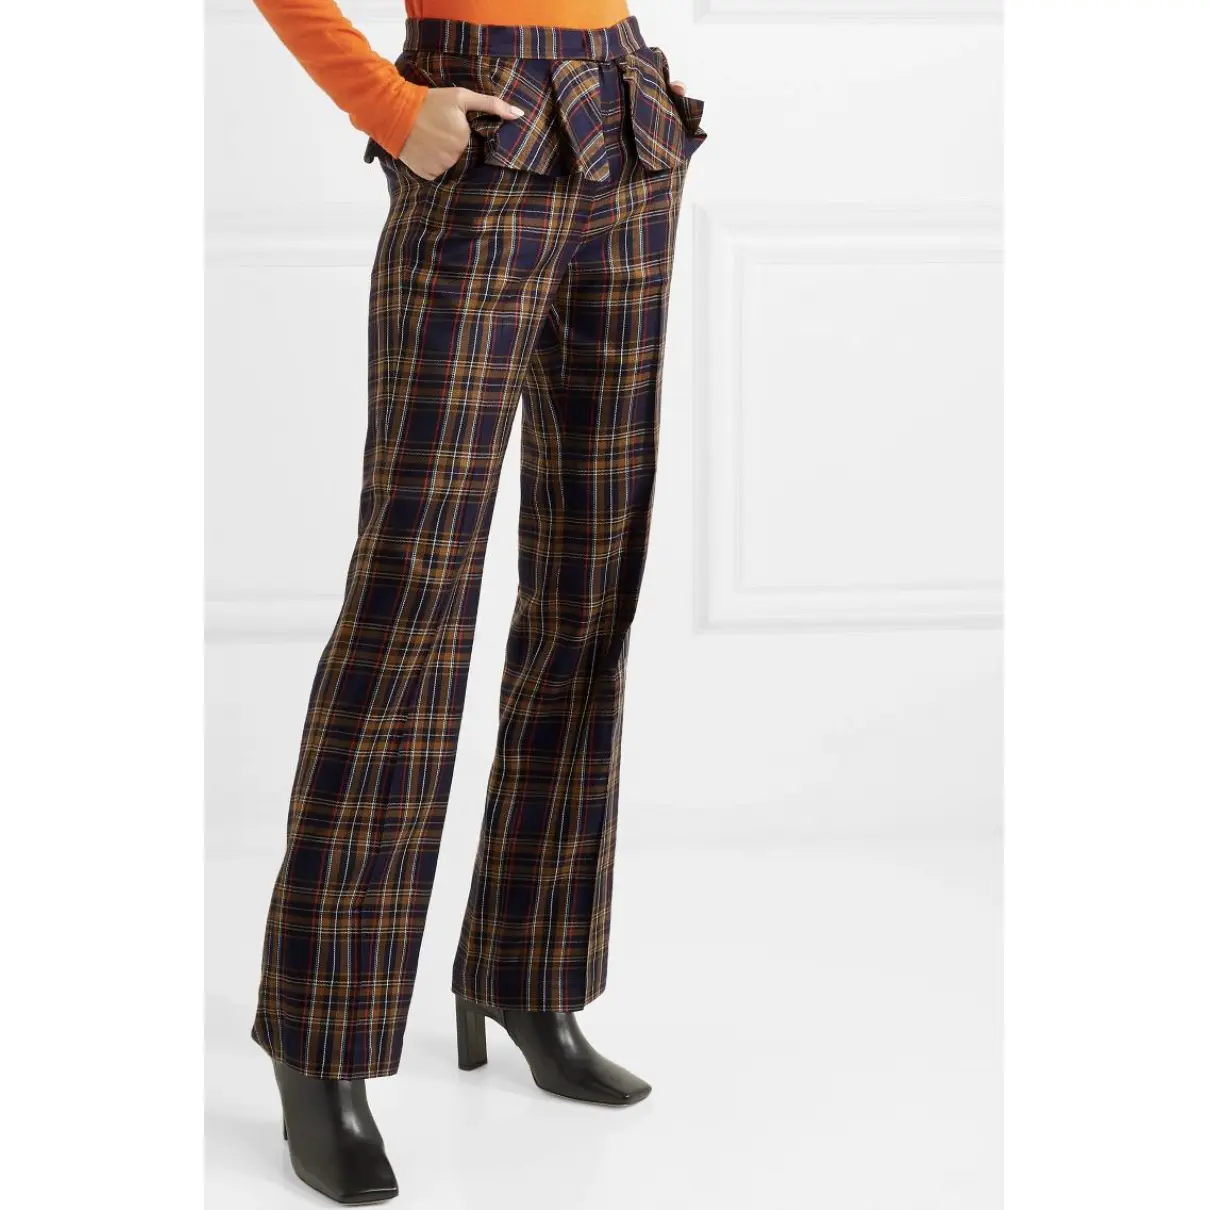 Buy Pushbutton Straight pants online